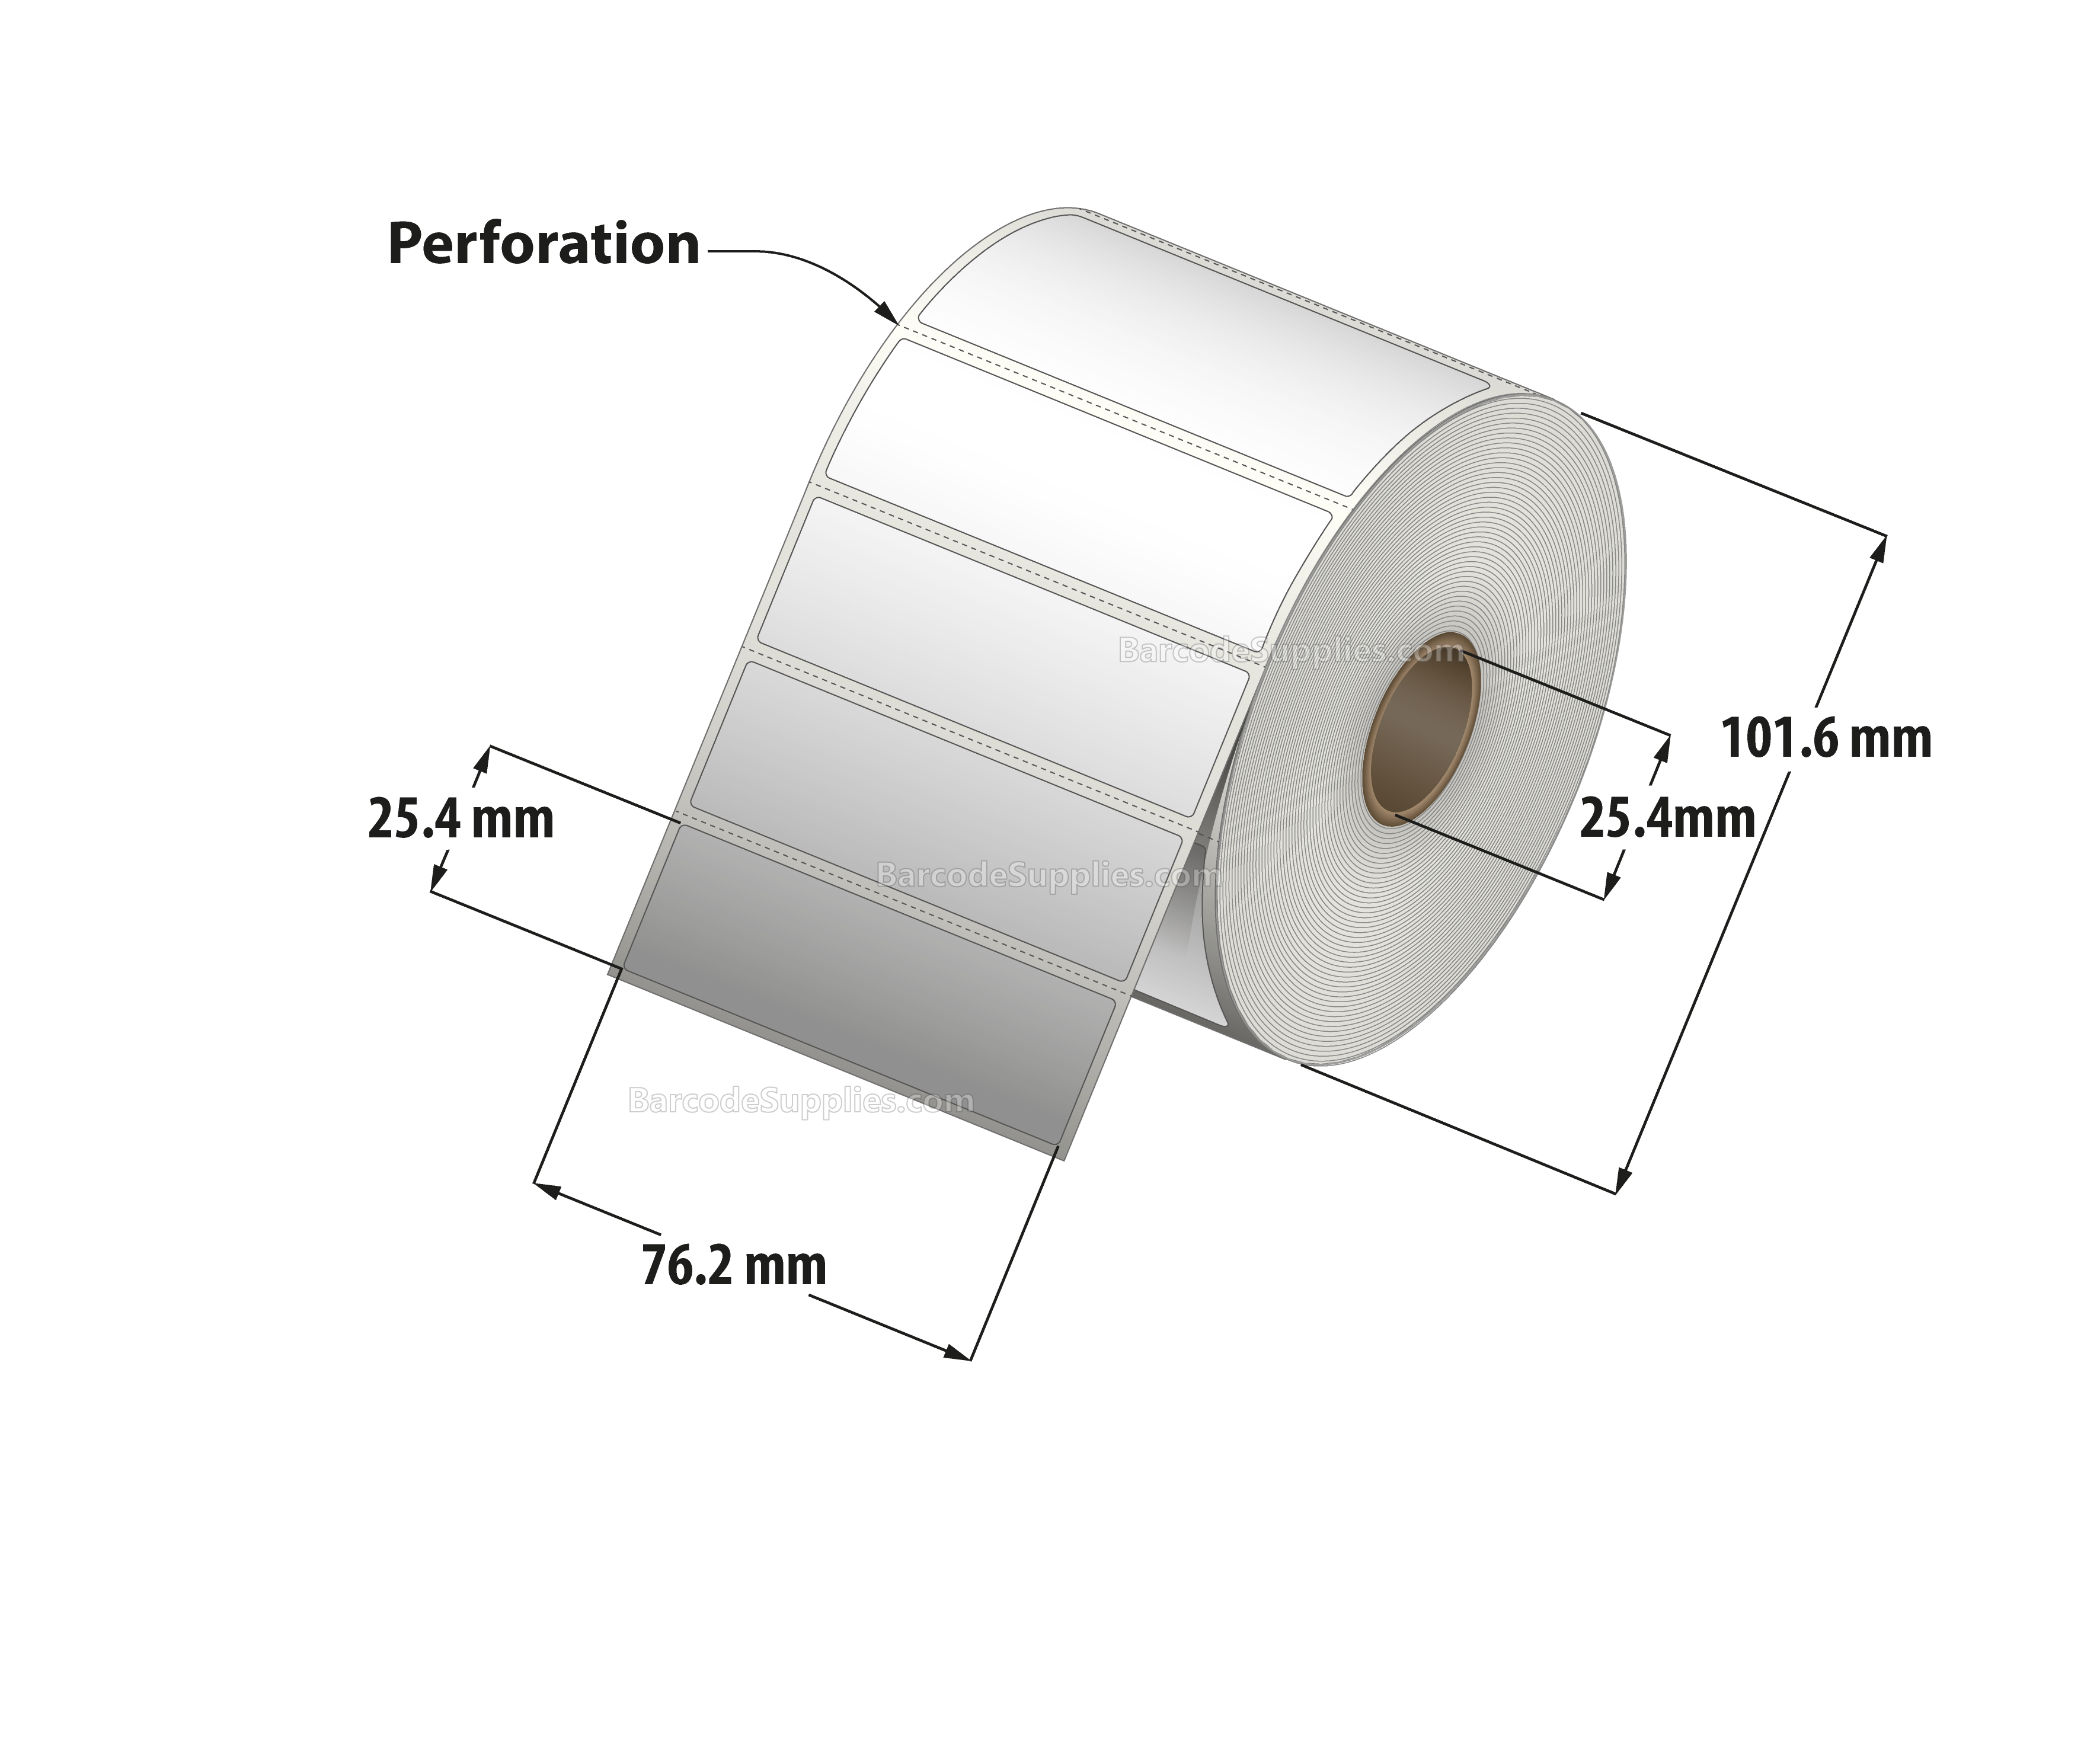 3 x 1 Thermal Transfer White Labels With Permanent Adhesive - Perforated - 1375 Labels Per Roll - Carton Of 12 Rolls - 16500 Labels Total - MPN: RT-3-1-1375-1 - BarcodeSource, Inc.